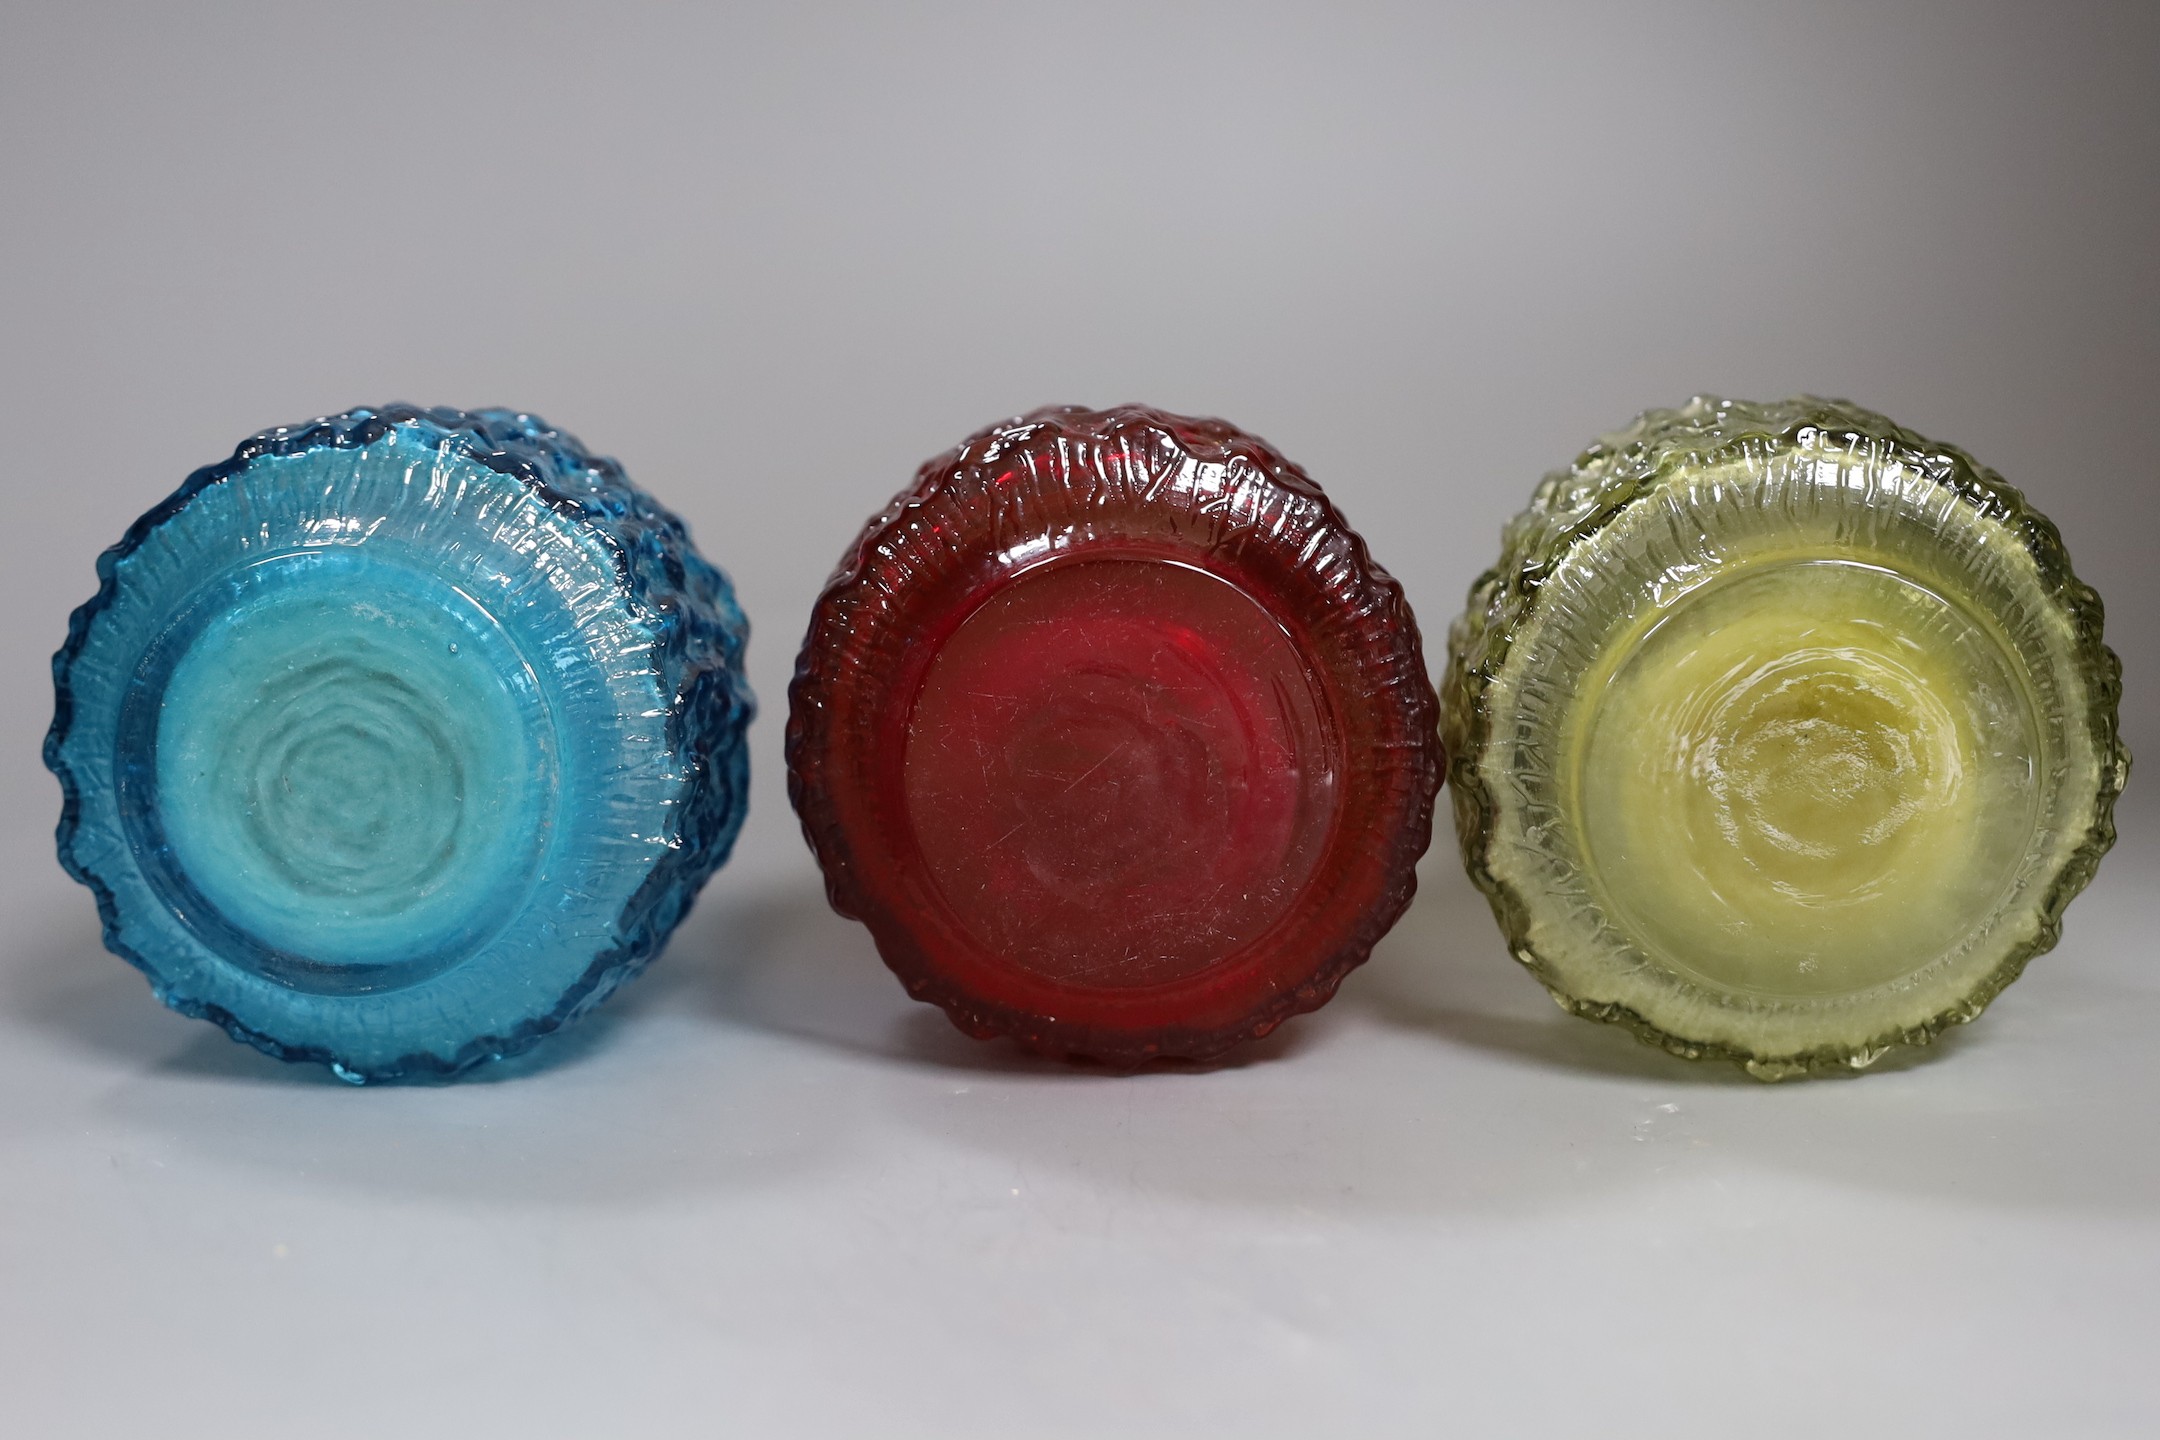 Three Whitefriars cylindrical bottle vases, in red, kingfisher blue and sage green glass (3) each 18cm high.